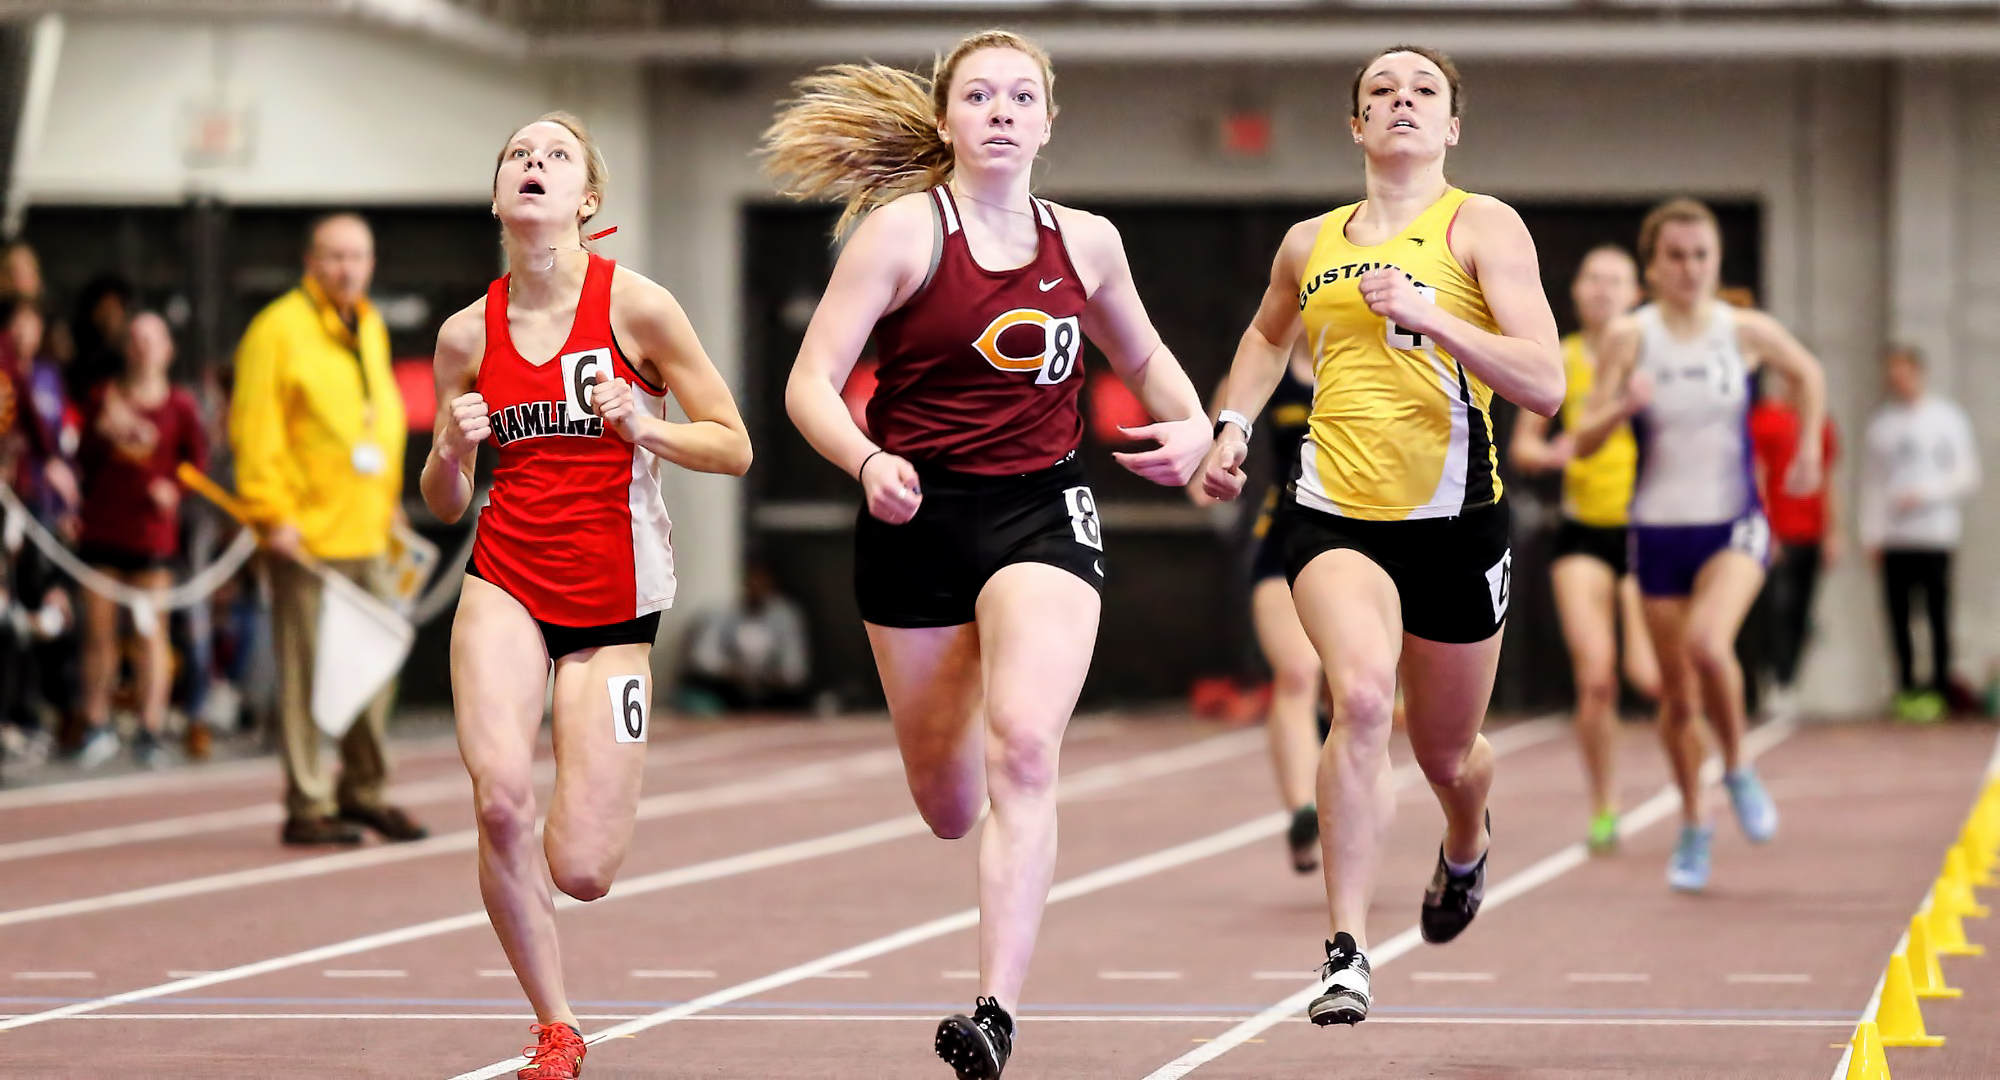 Sophomore Josie Herrmann crosses the finish line a mere .15 of a second ahead of the runner from Hamline to win the 1000 meters at the MIAC Indoor Meet. (Photo courtesy of Nathan Lodermeier)